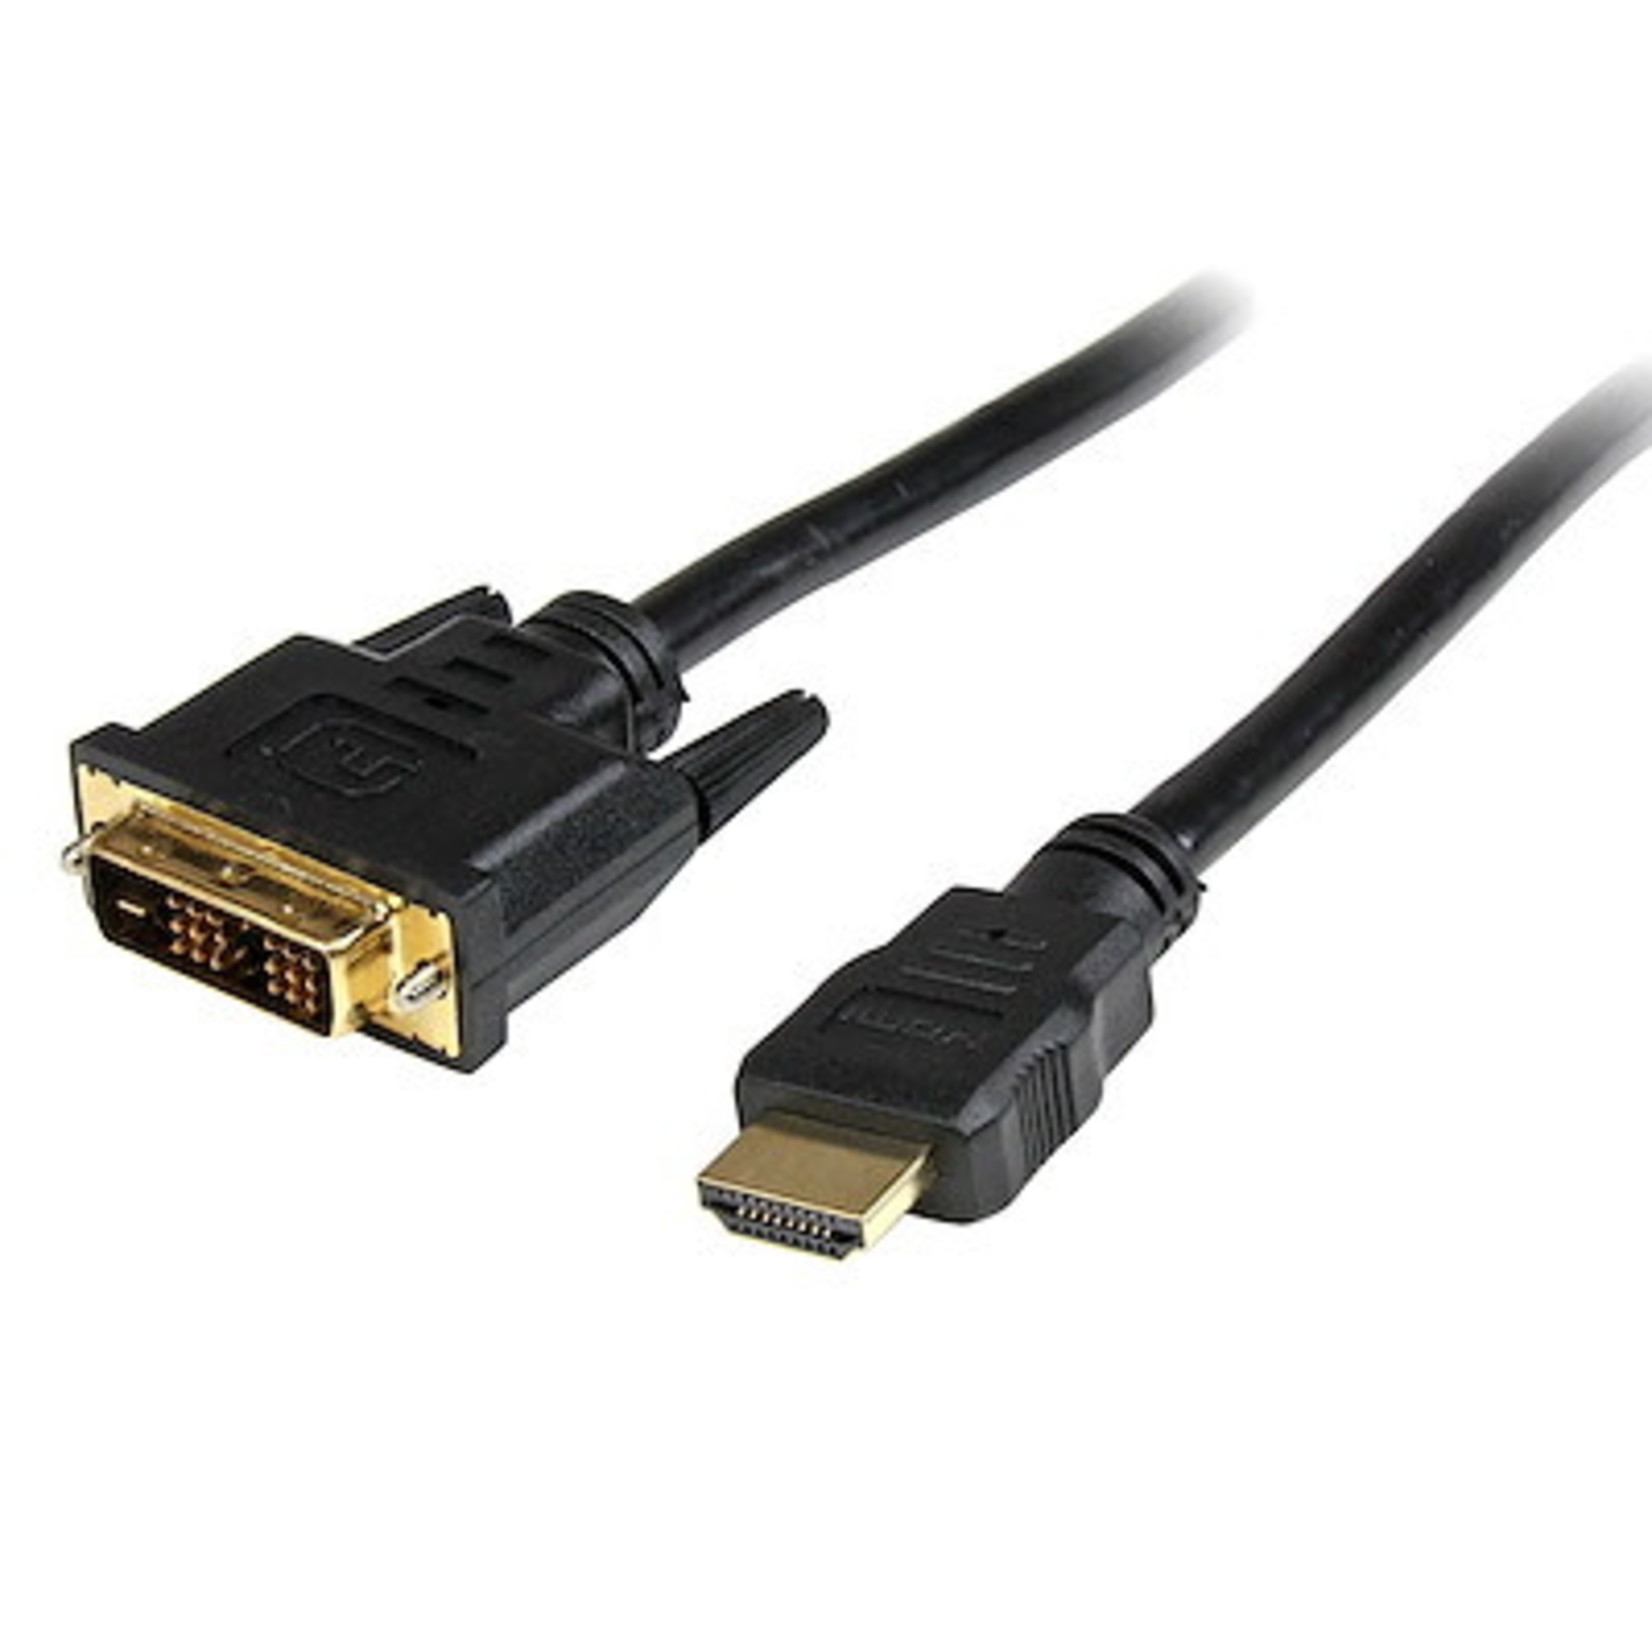 Startech 10' HDMI to DVI Digital Cable